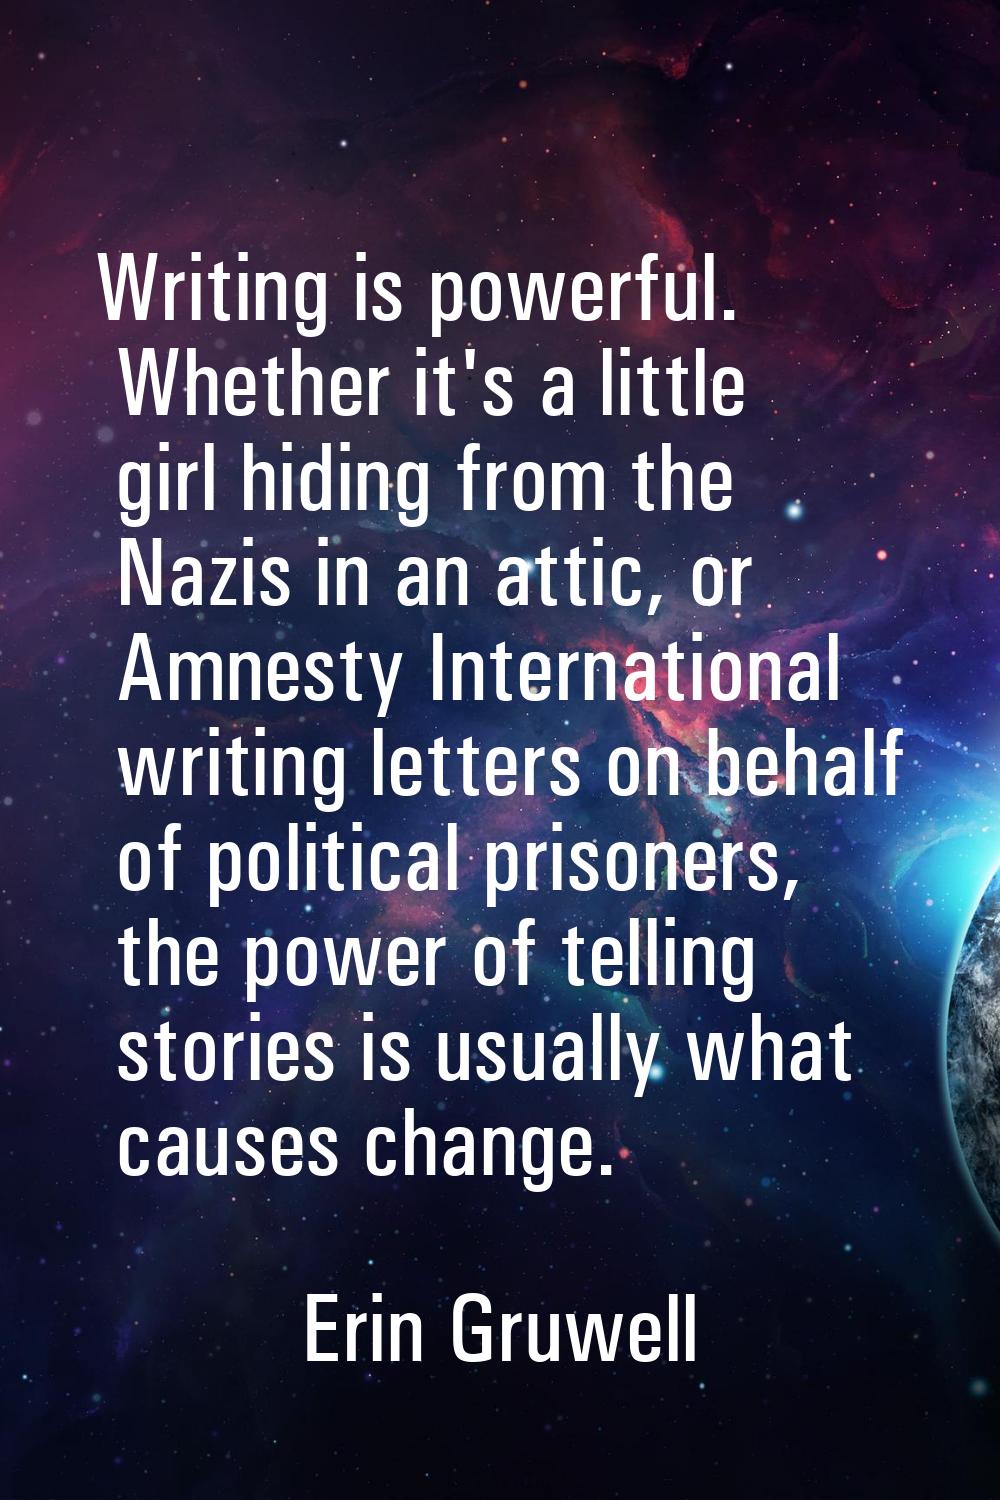 Writing is powerful. Whether it's a little girl hiding from the Nazis in an attic, or Amnesty Inter